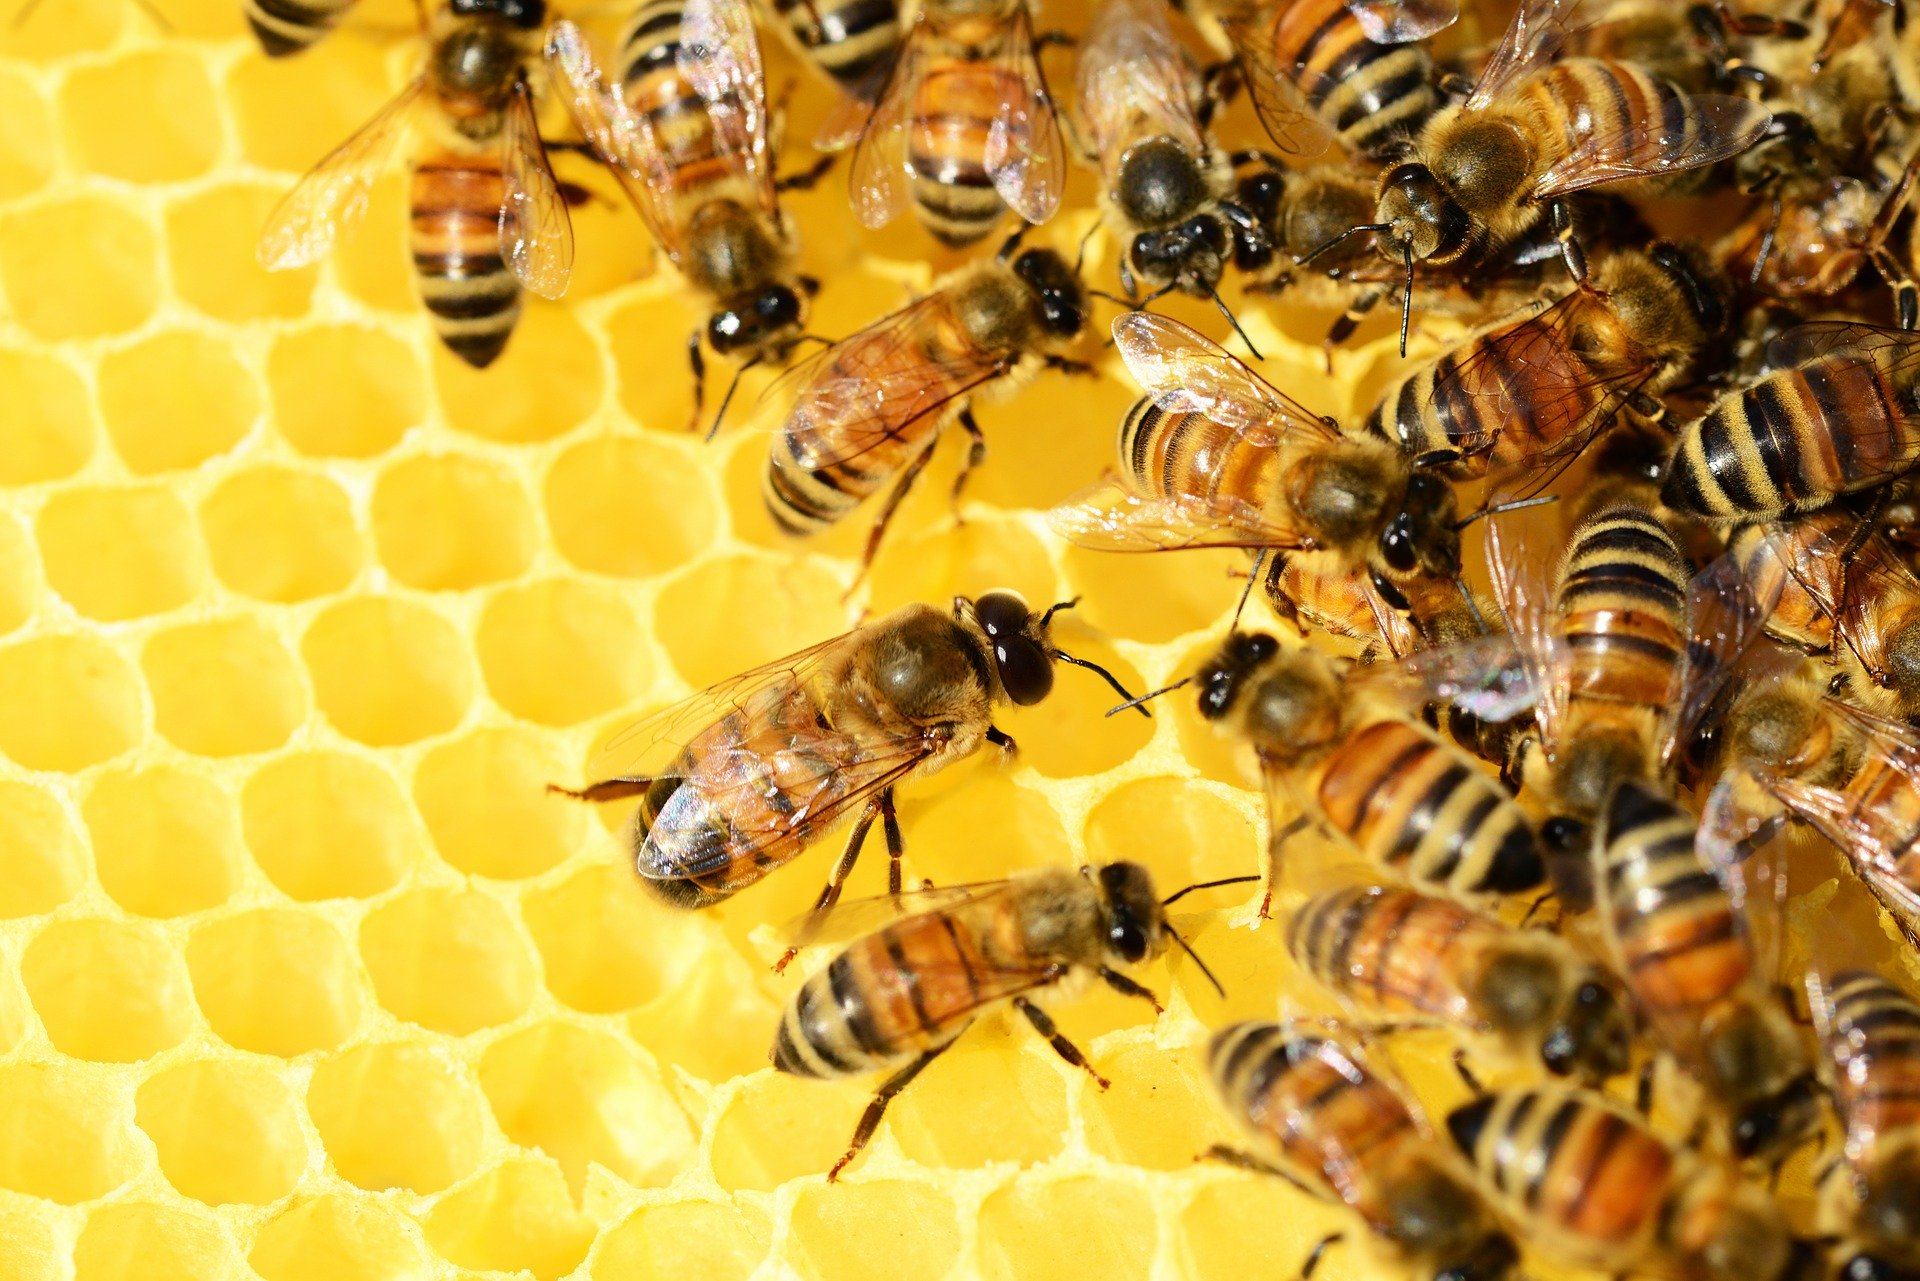 A close-up of honeybees on honeycomb